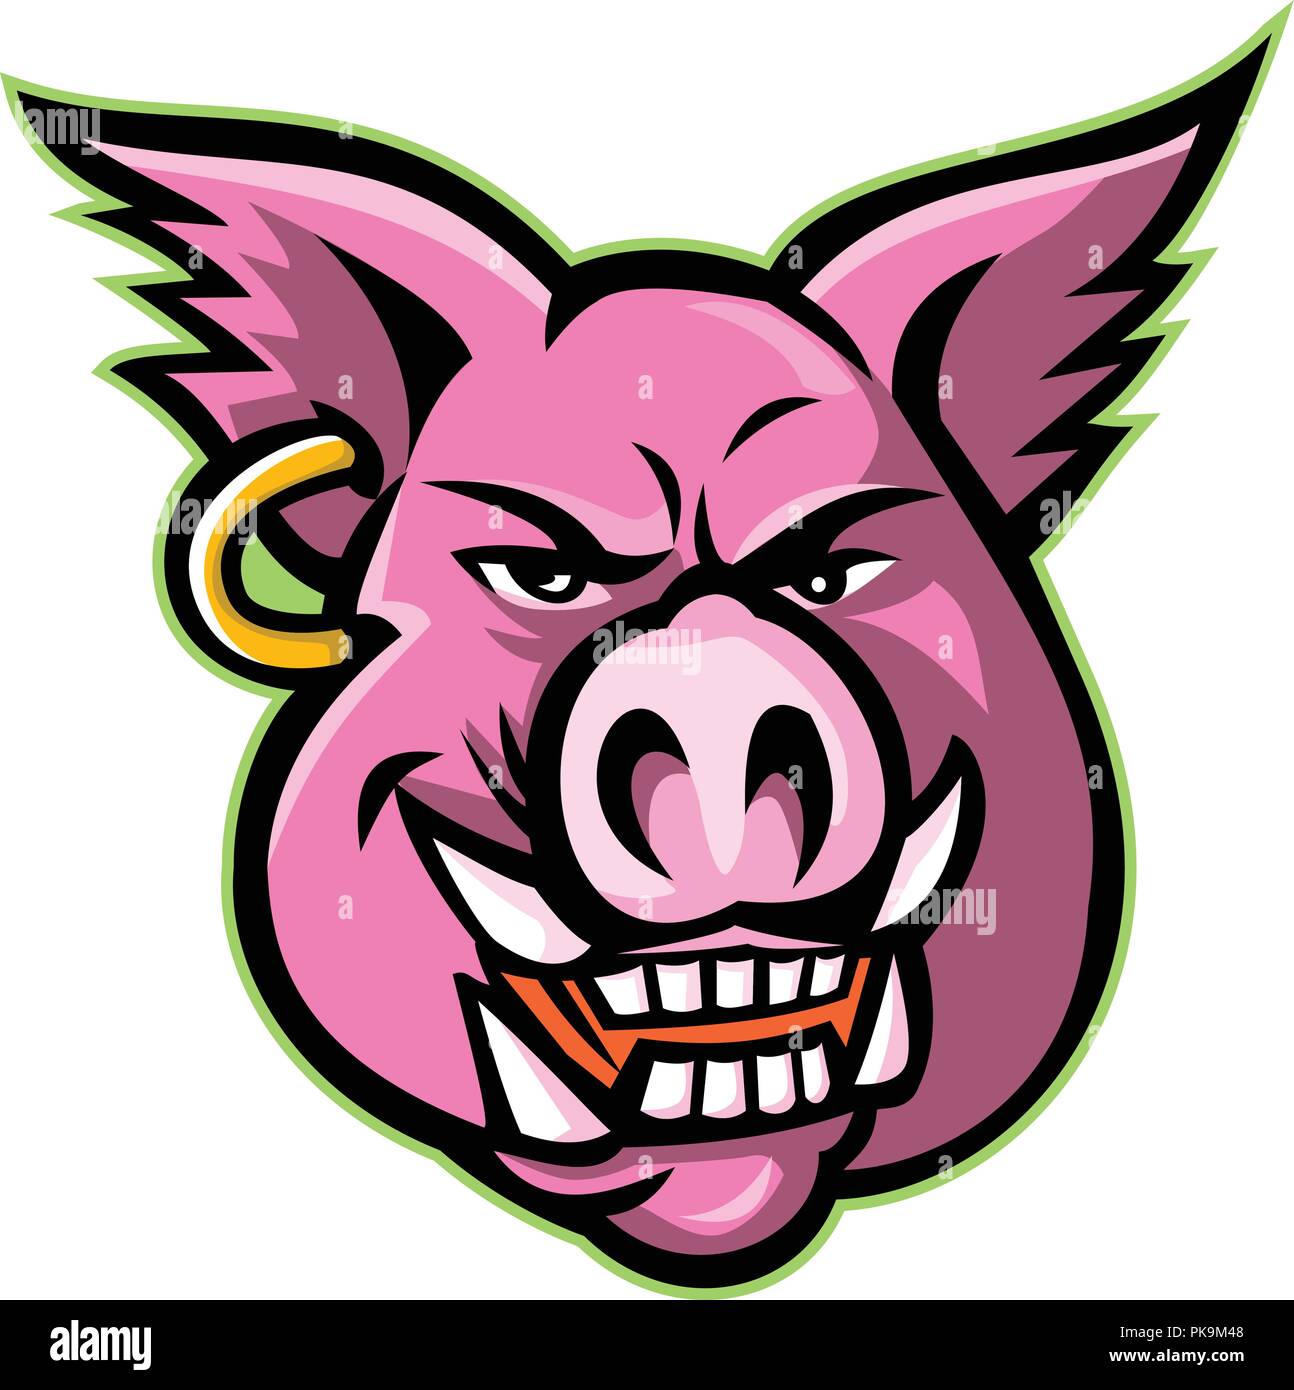 Mascot icon illustration of head of a pink wild pig, boar or hog wearing an earring  viewed from front on isolated background in retro style. Stock Vector